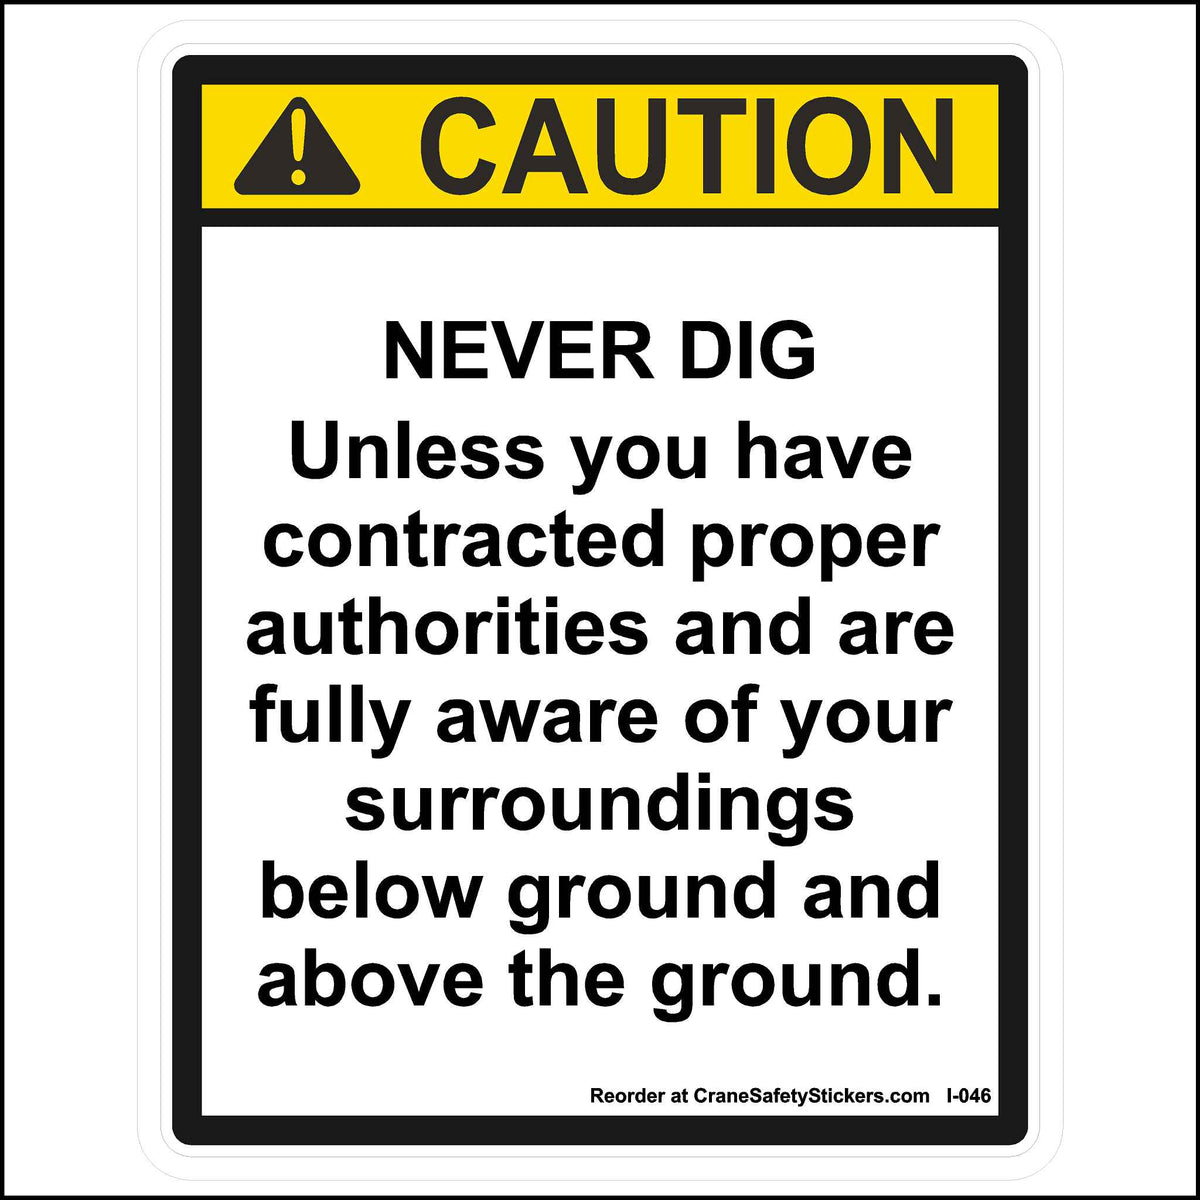 This Caution Never Dig Sticker is printed with.  CAUTION Never dig unless you have contacted proper authorities and are fully aware of your surroundings below ground and above the ground.